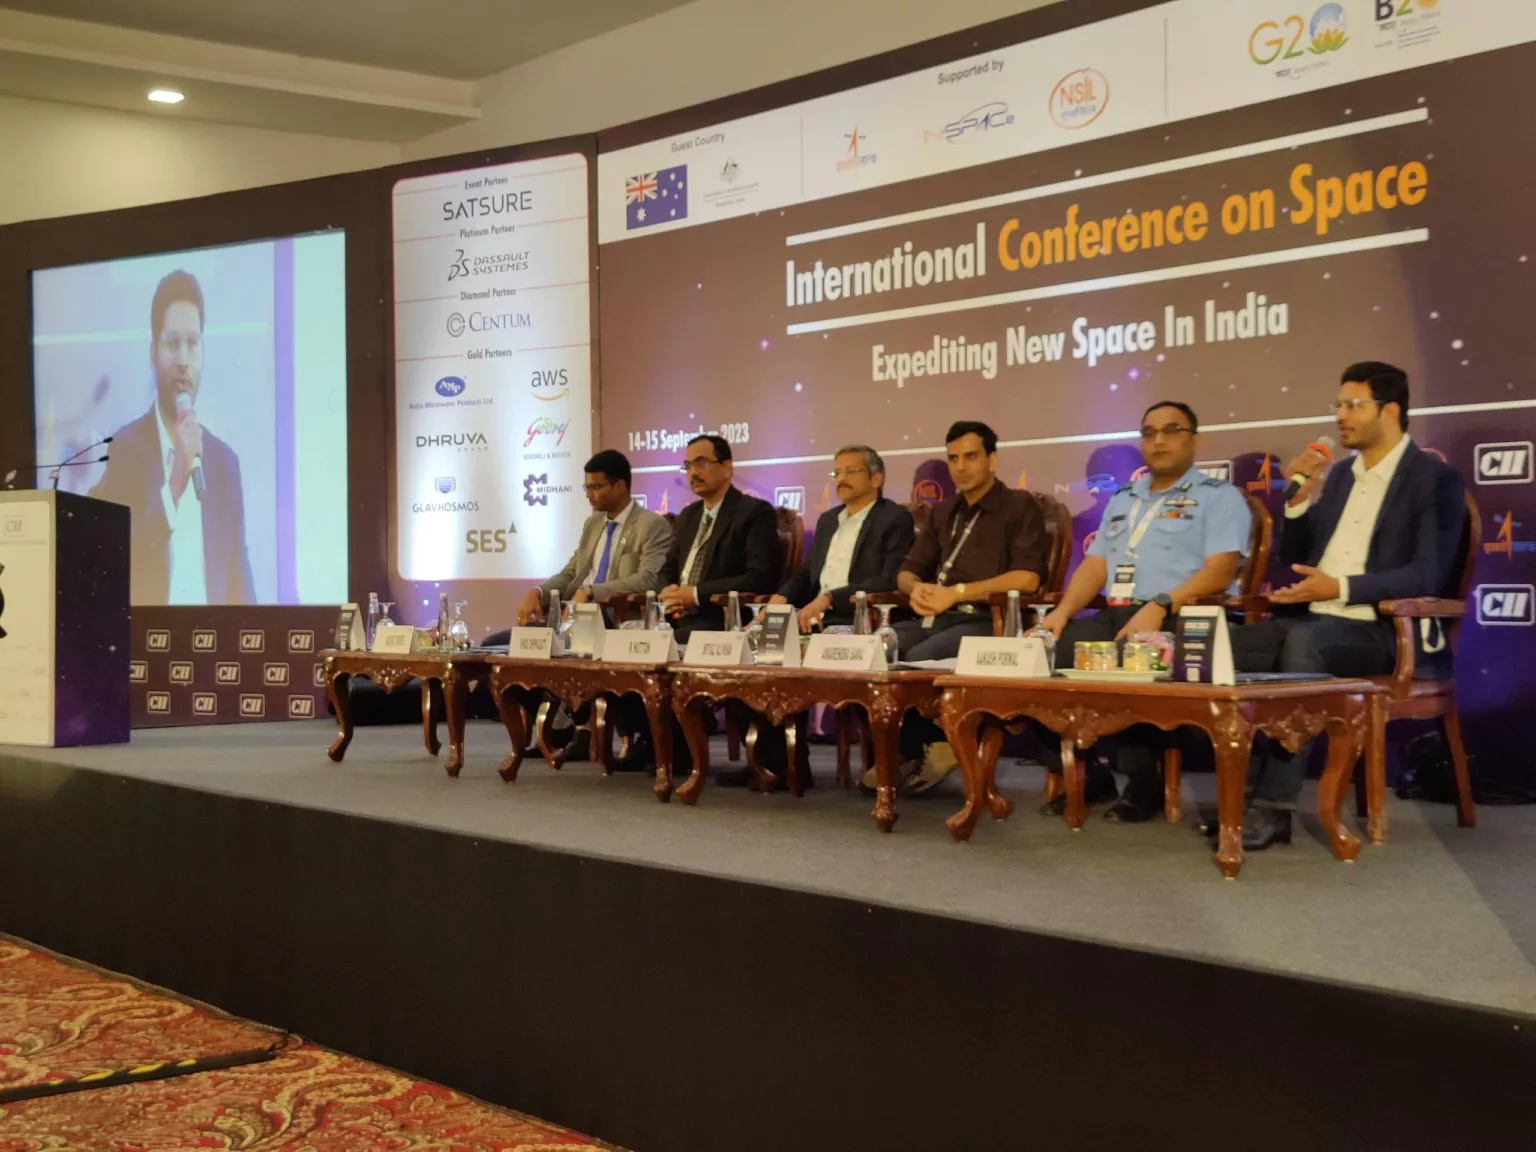 Founder, Aakash Porwal invited as a speaker & panelist at International Conference on Space 2023